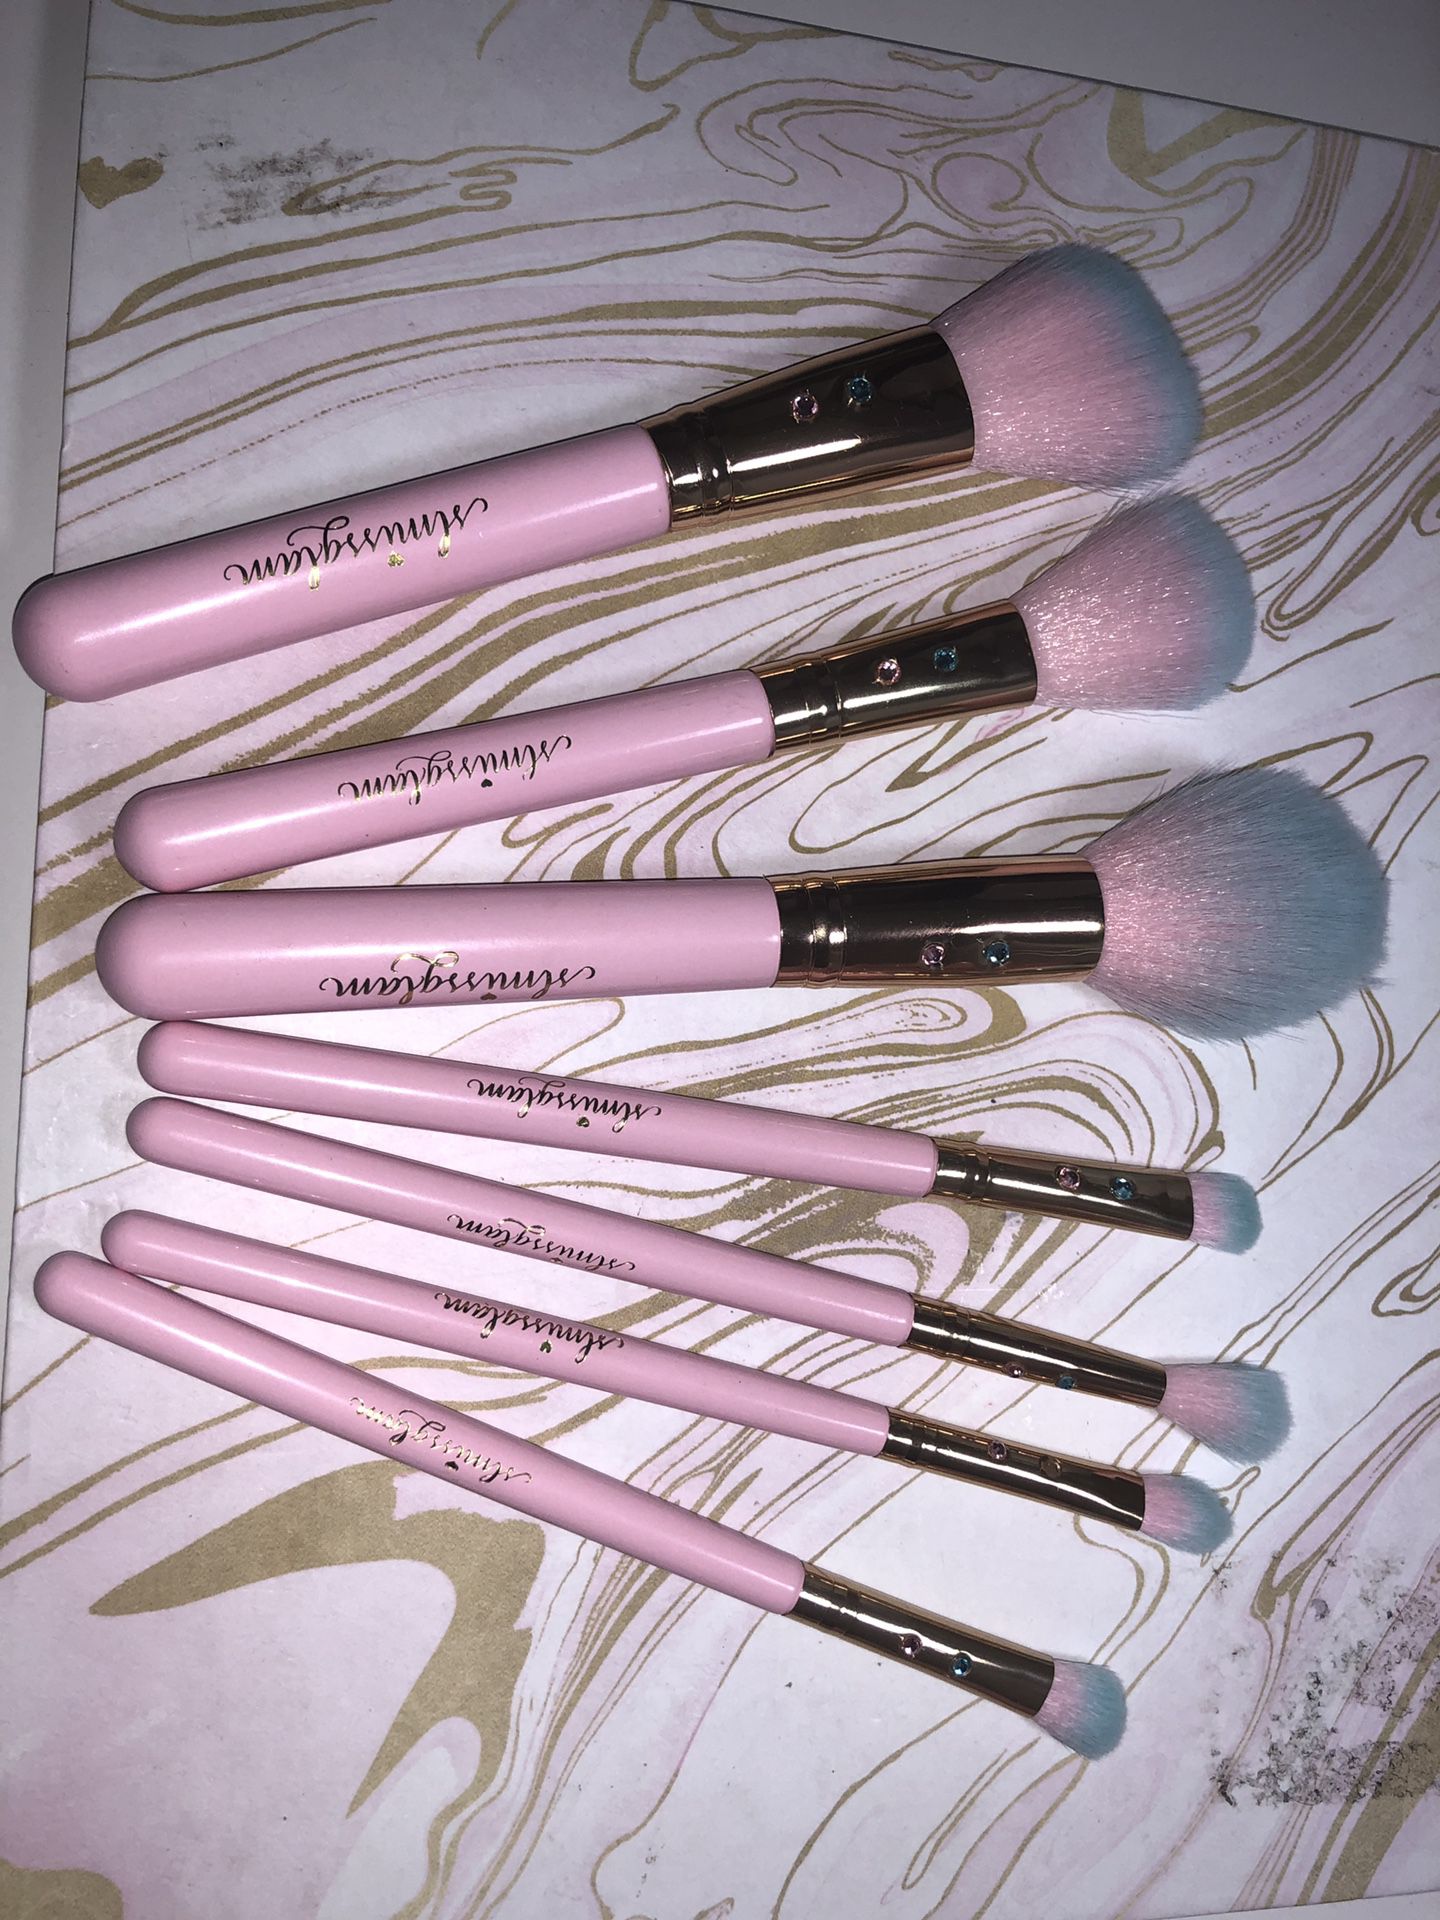 Makeup Brushes, Brand new, never used, open package to take pictures.Pink and blue price $35.00 Each set, I have 2 sets. Gold and Pink Set $25.00 the